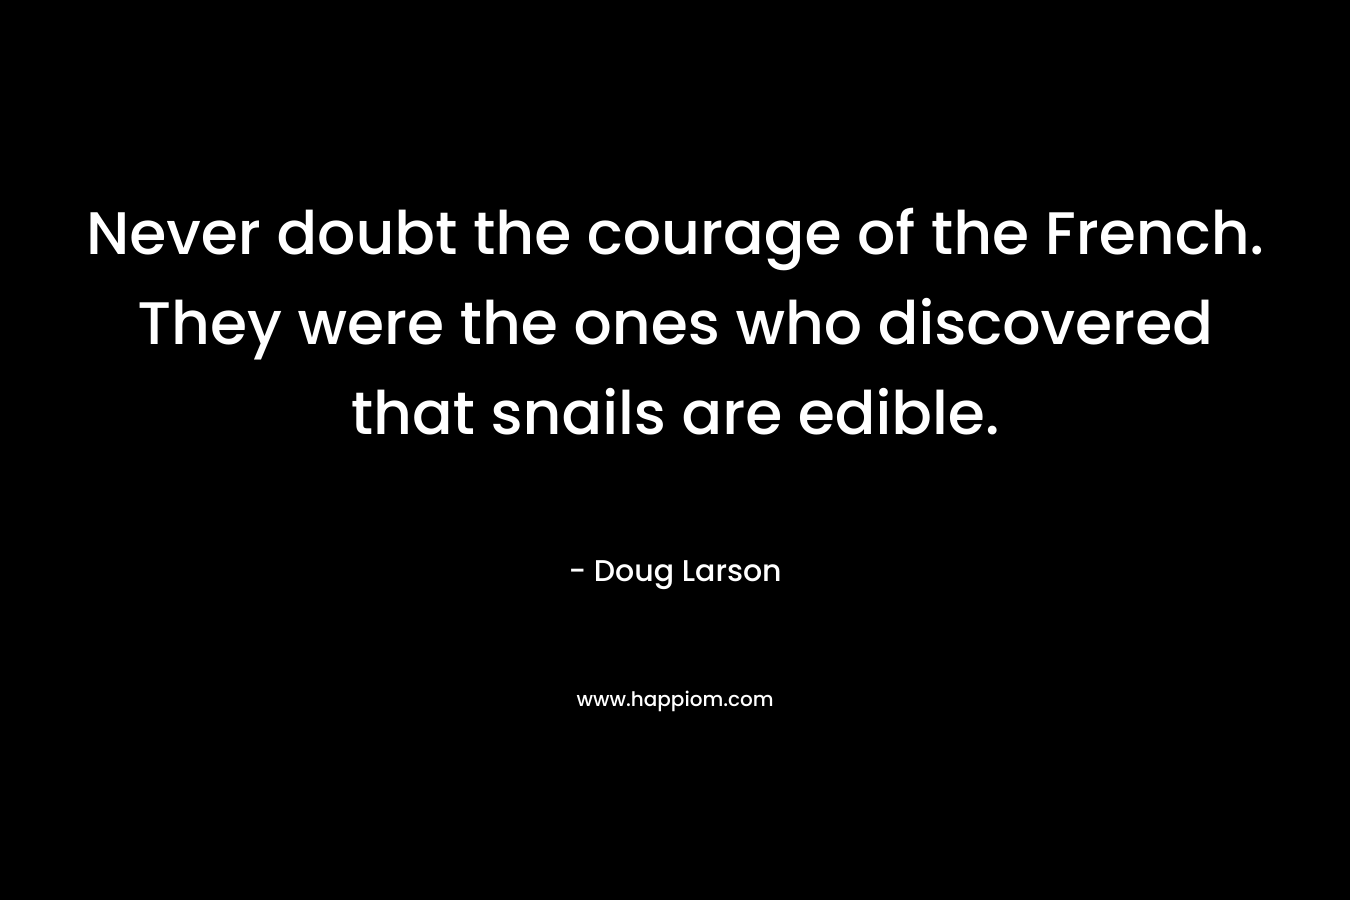 Never doubt the courage of the French. They were the ones who discovered that snails are edible.